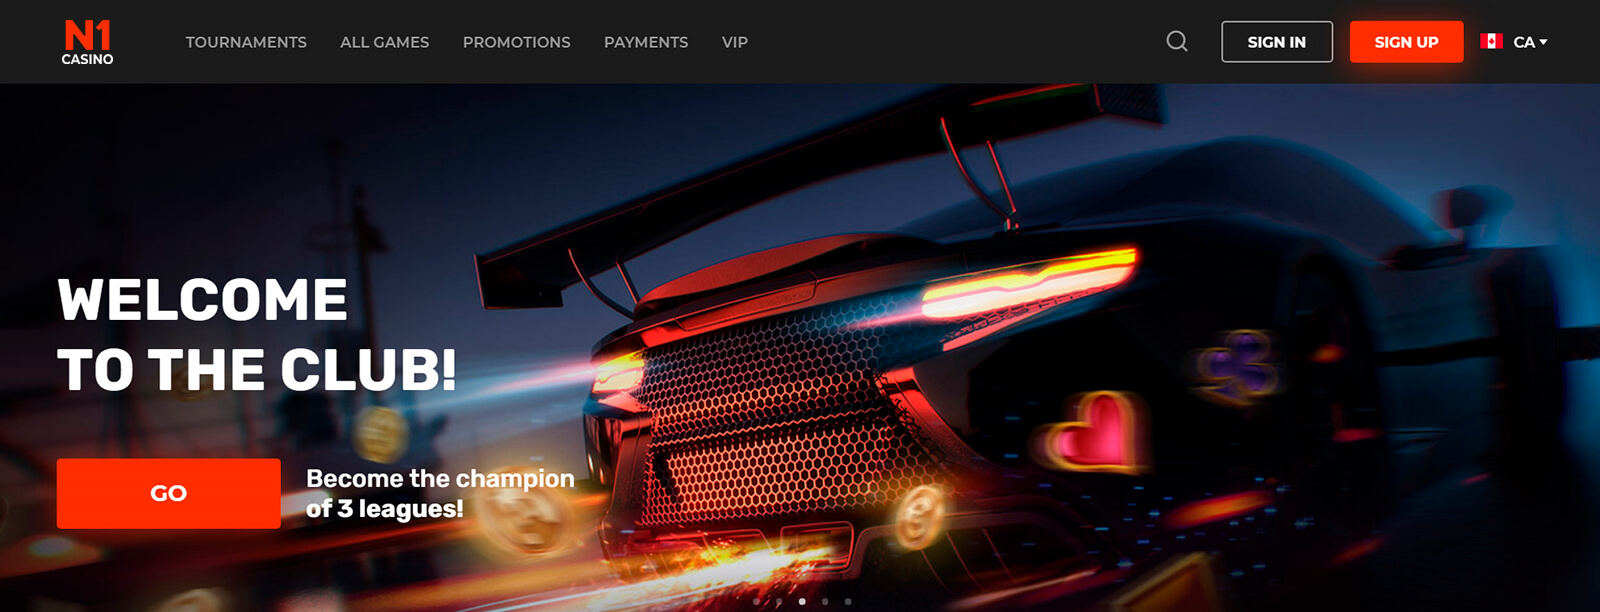 N1 Casino main page screenshot. Invite message: Welcome to the club! .Sports car accelerates in the night on background